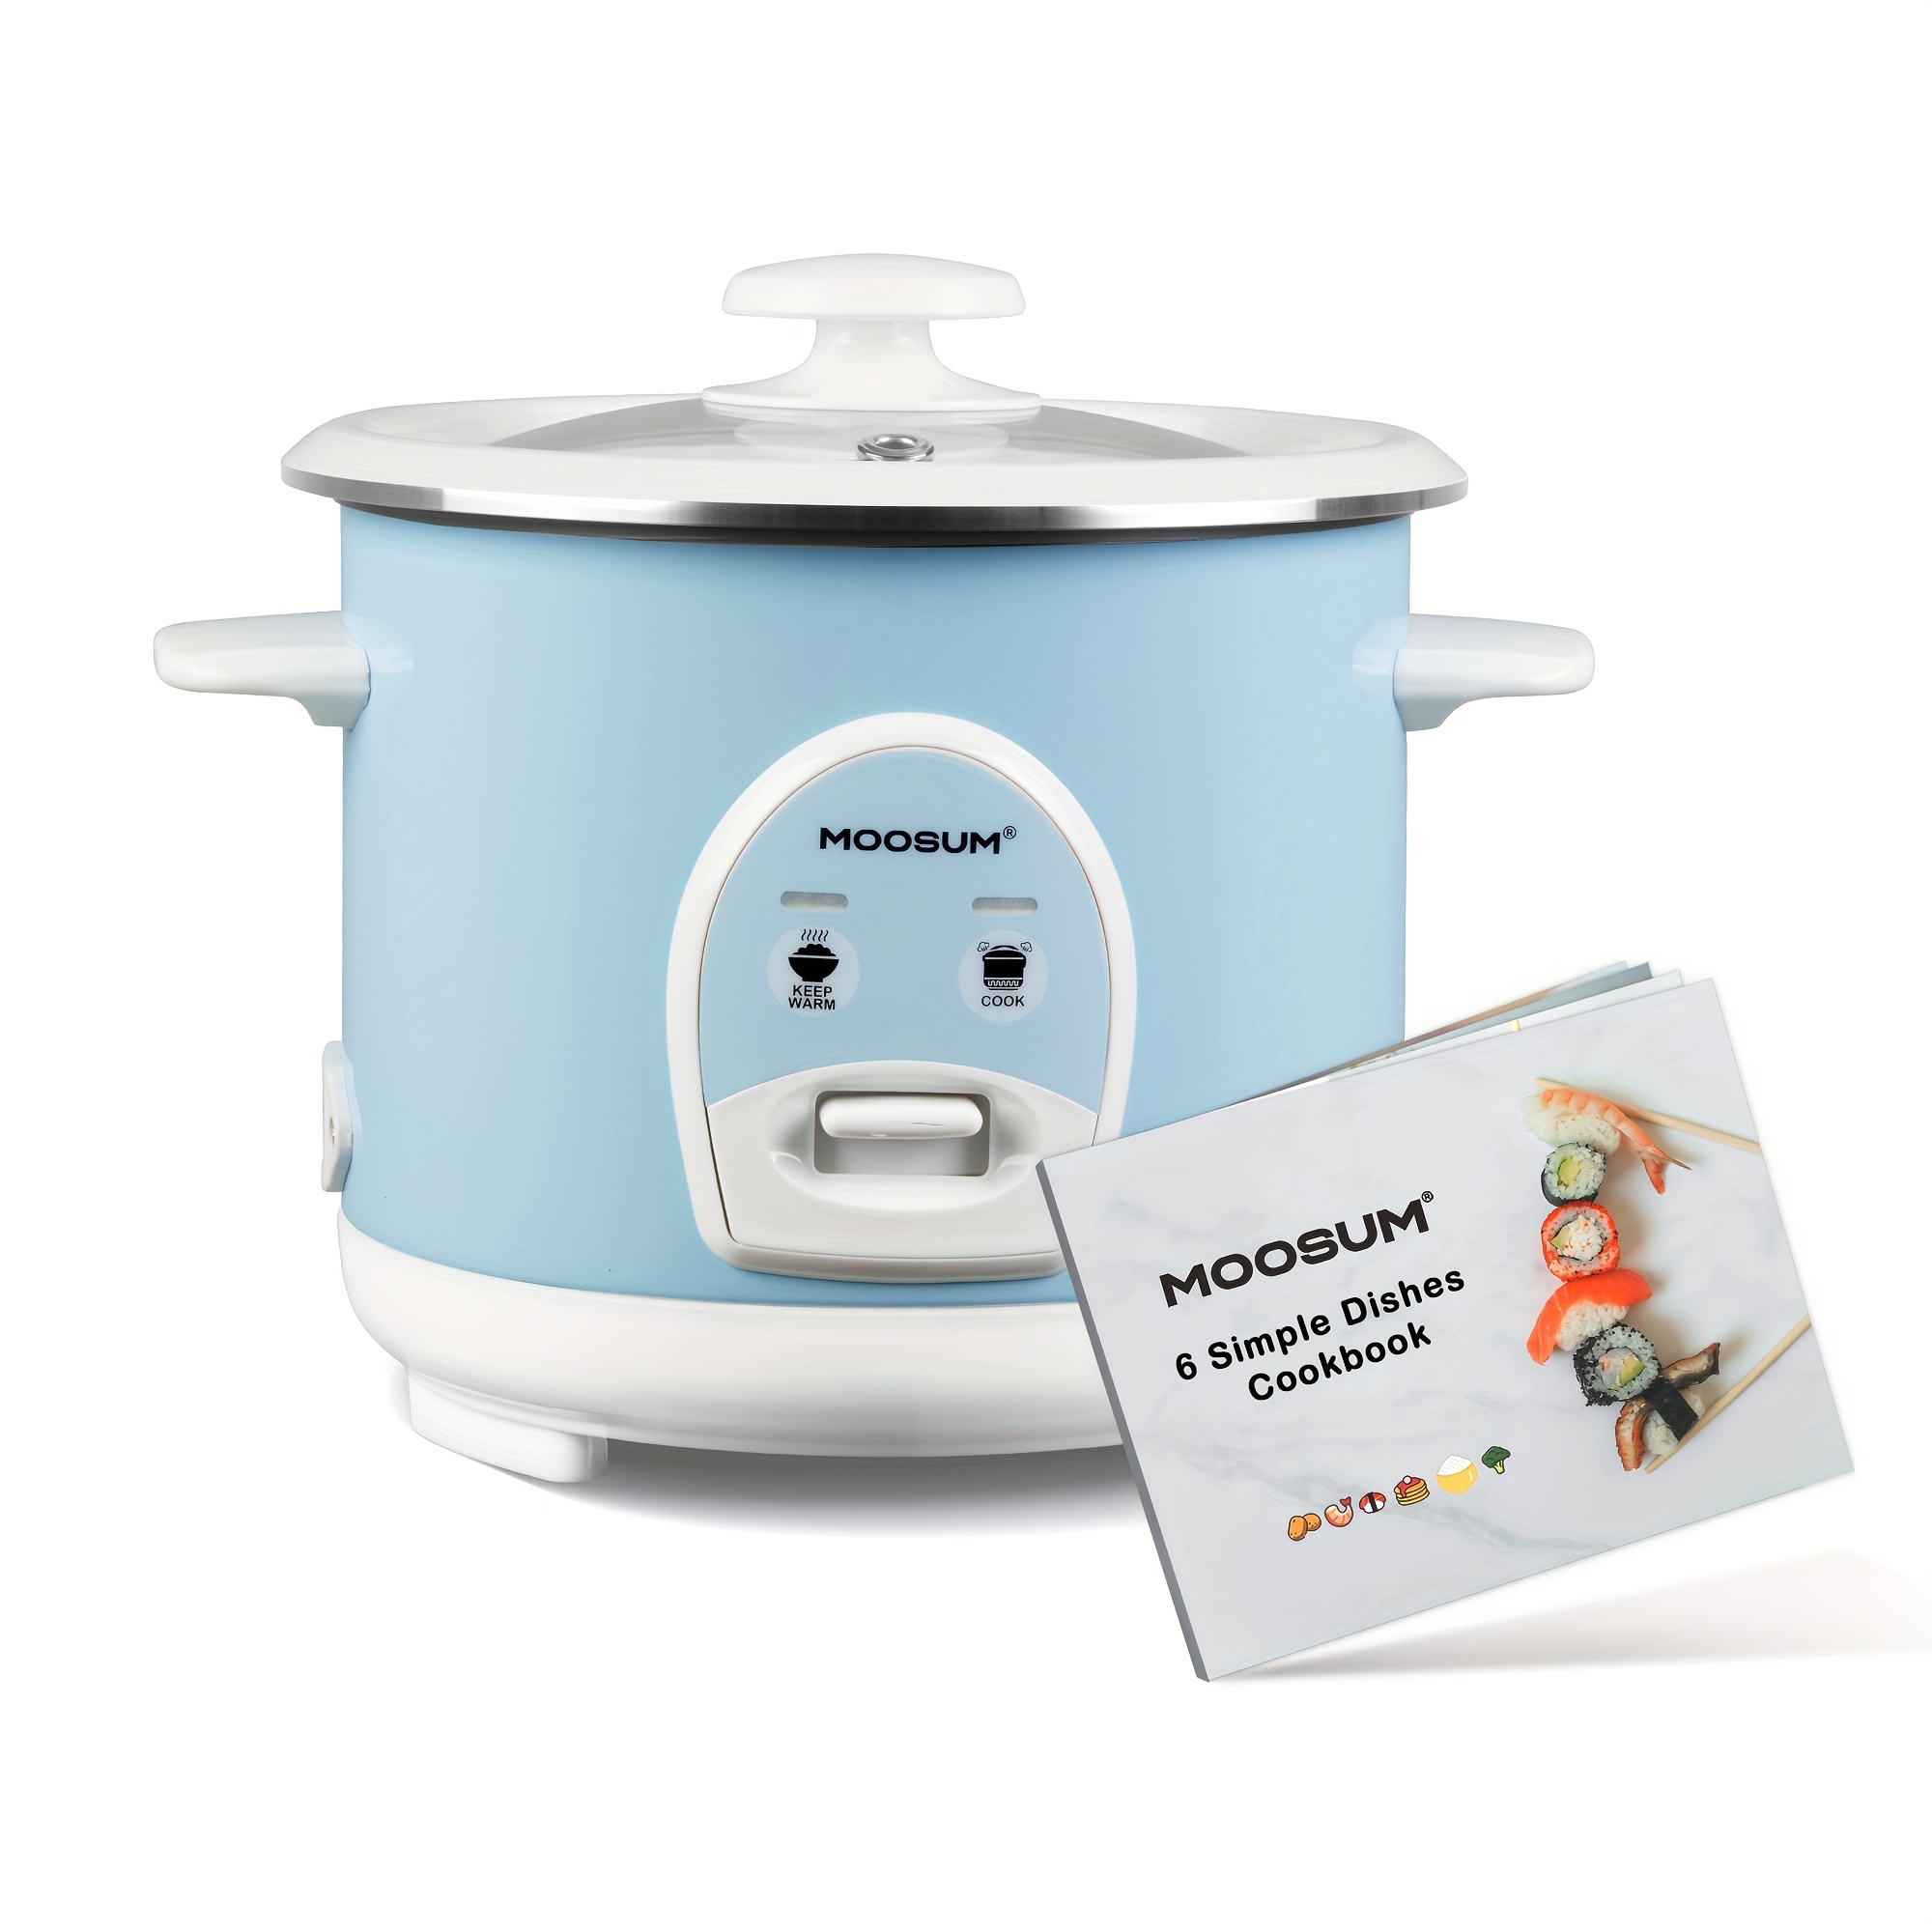 Rice Cooker Small 6 Cups Cooked(3 Cups Uncooked), 1.5L Small Rice Cooker  with Steamer For 1-3 people, Removable Nonstick Pot, One Button&Keep Warm